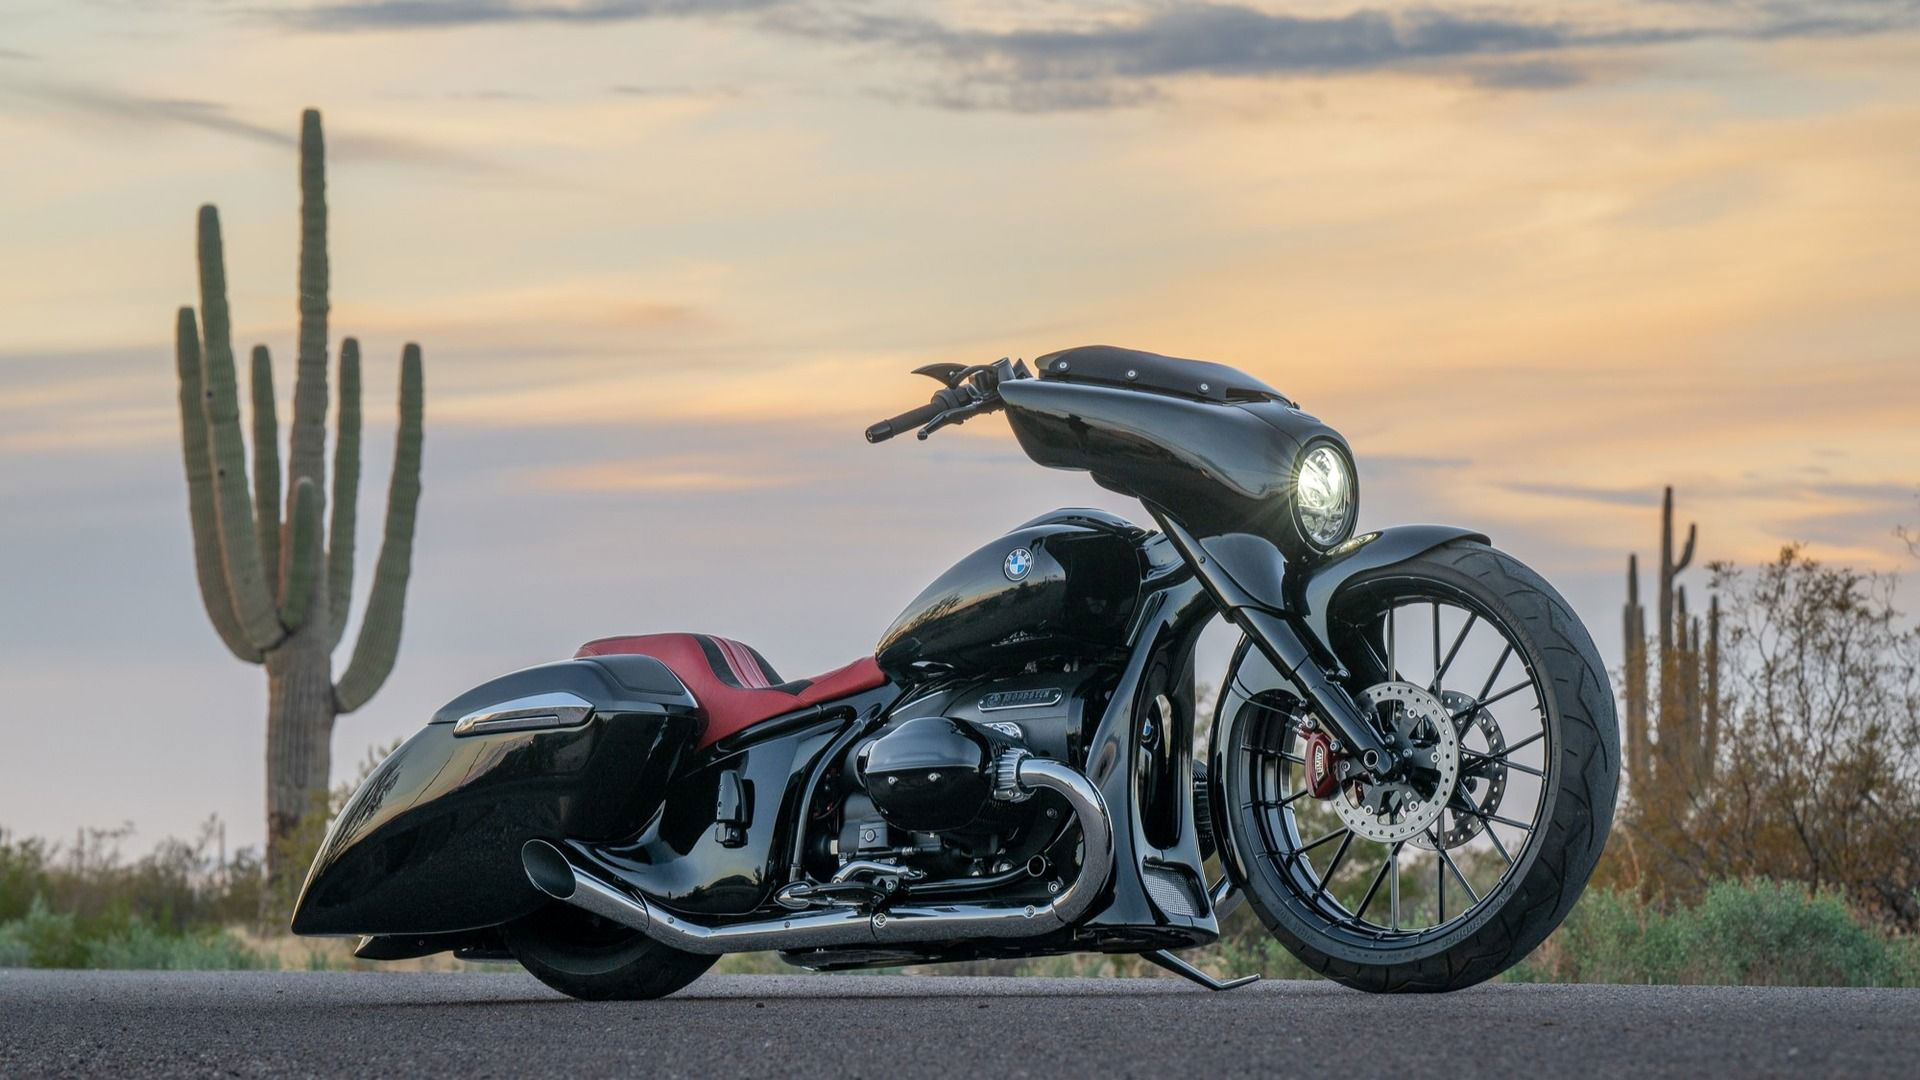 An Awesome BMW Custom Motorcycle Inspired By Hot Rods